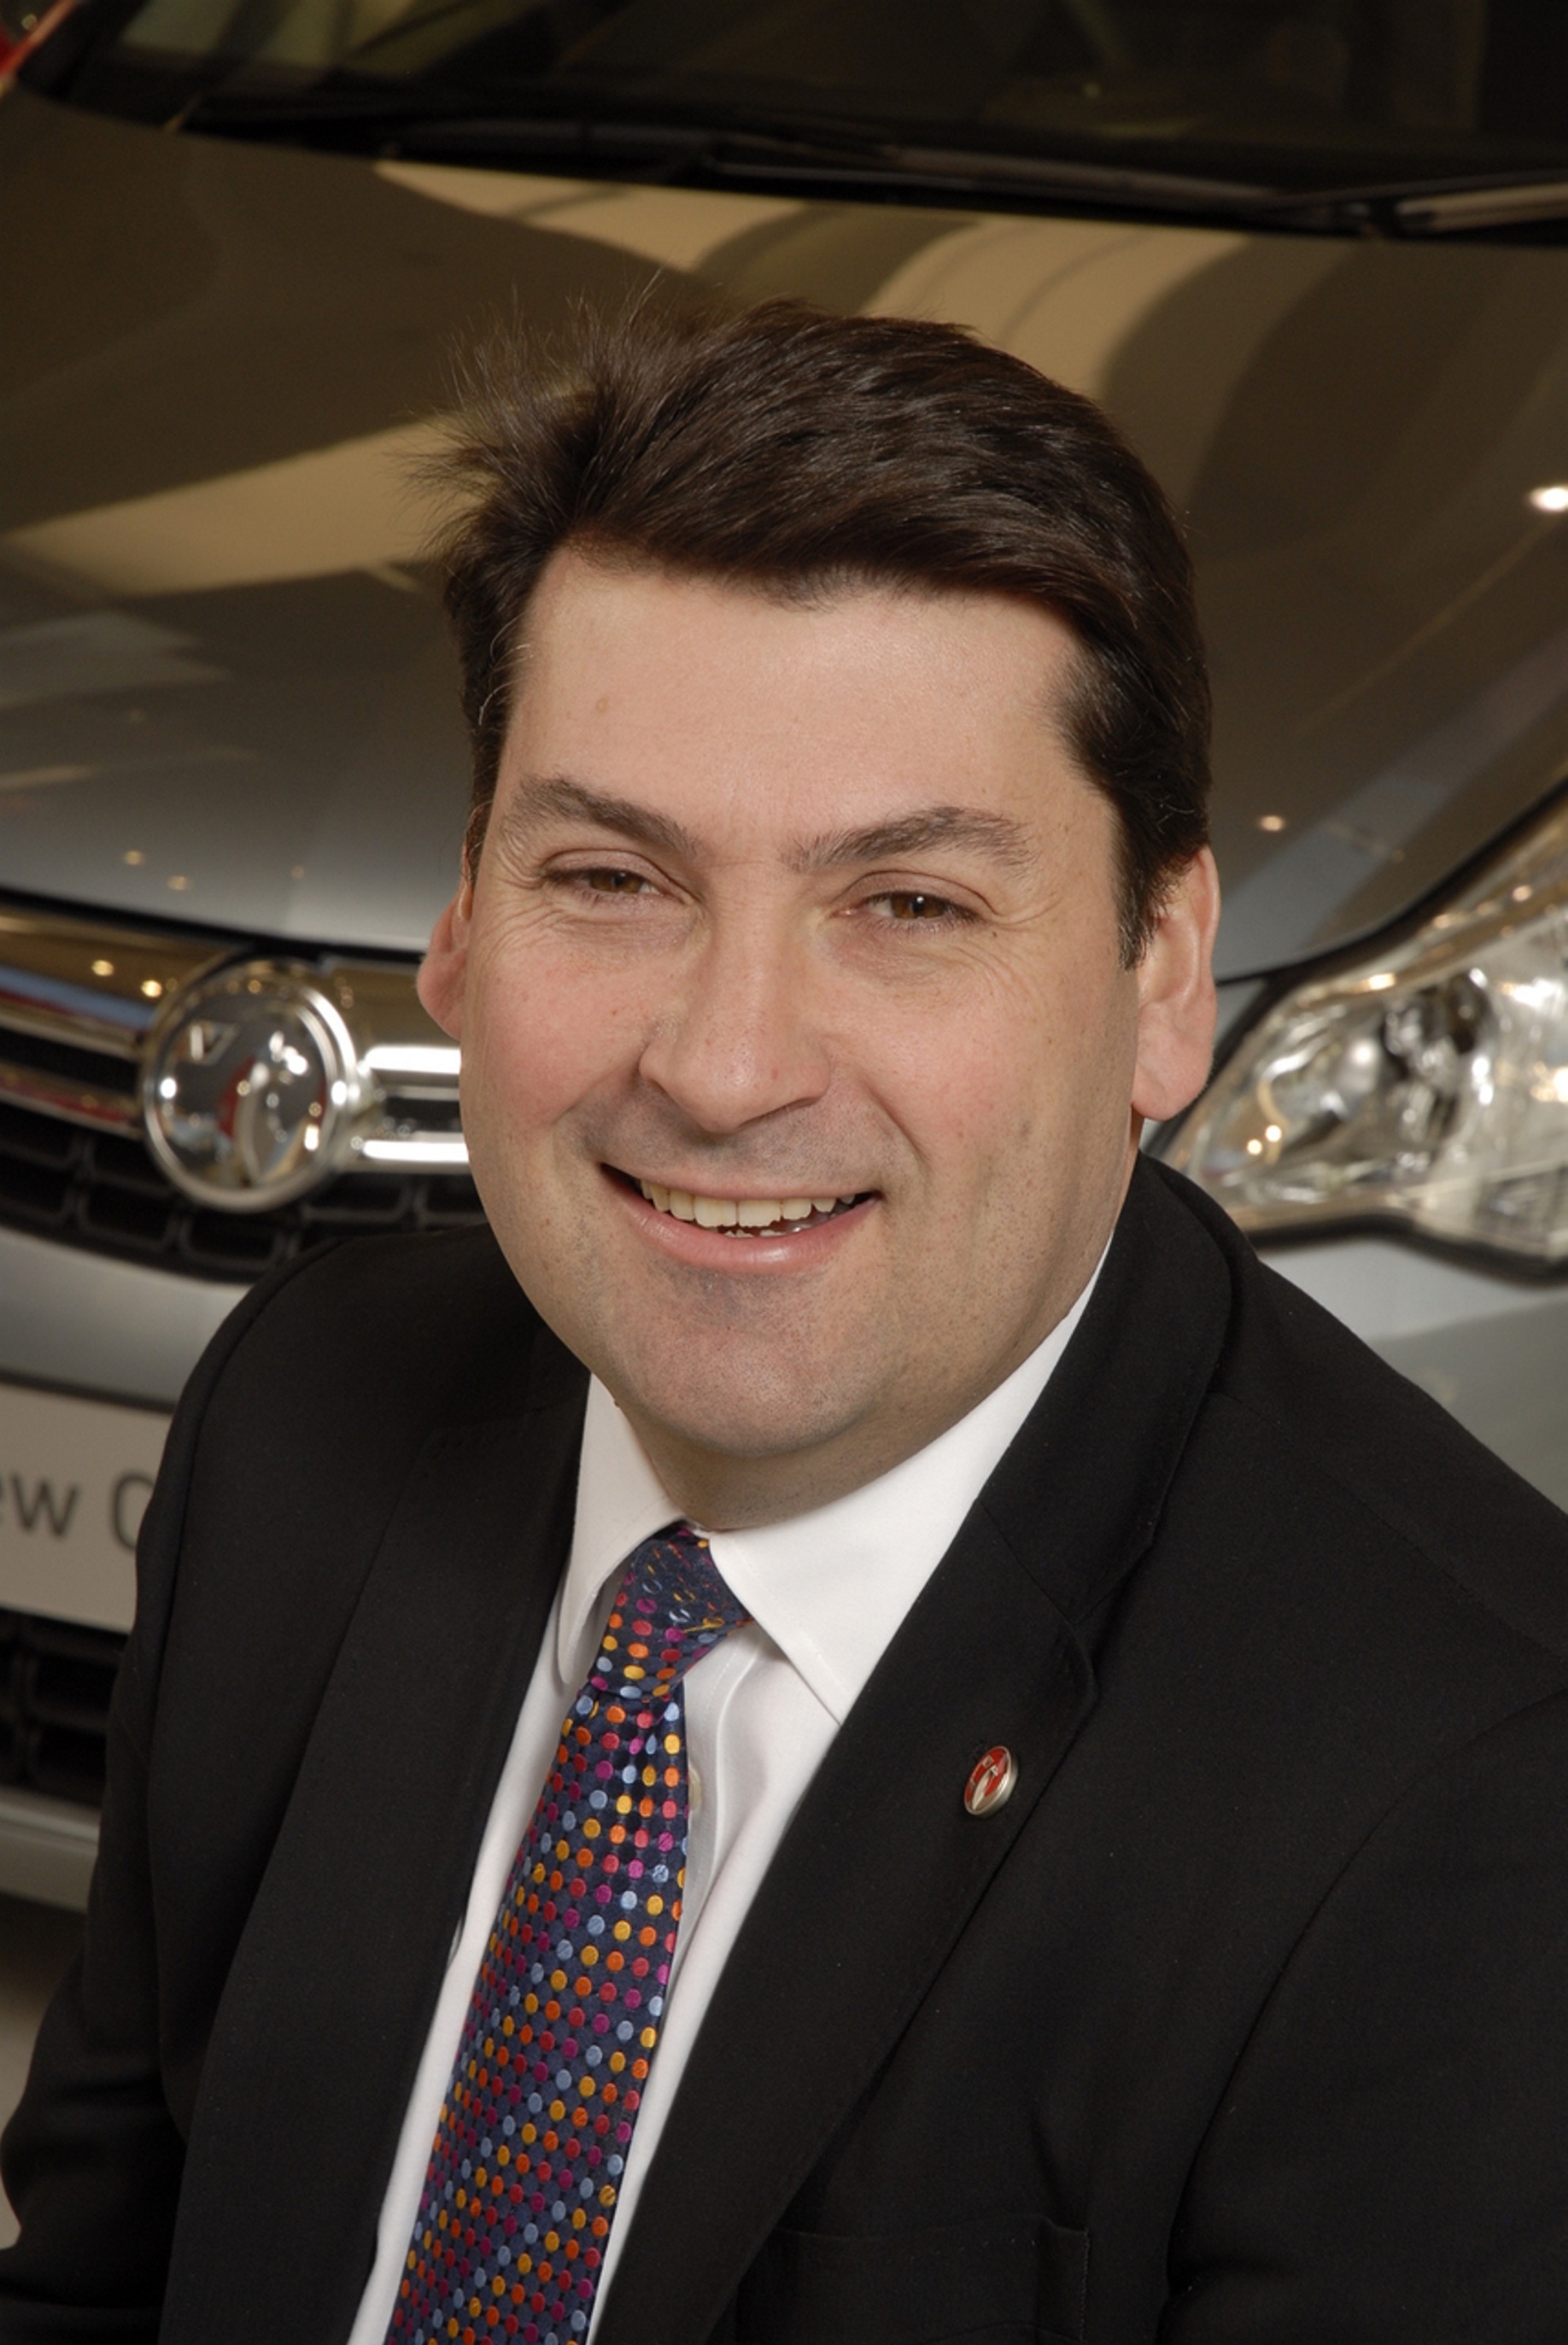 VAUXHALL ANNOUNCES NEW AFTERSALES DIRECTOR